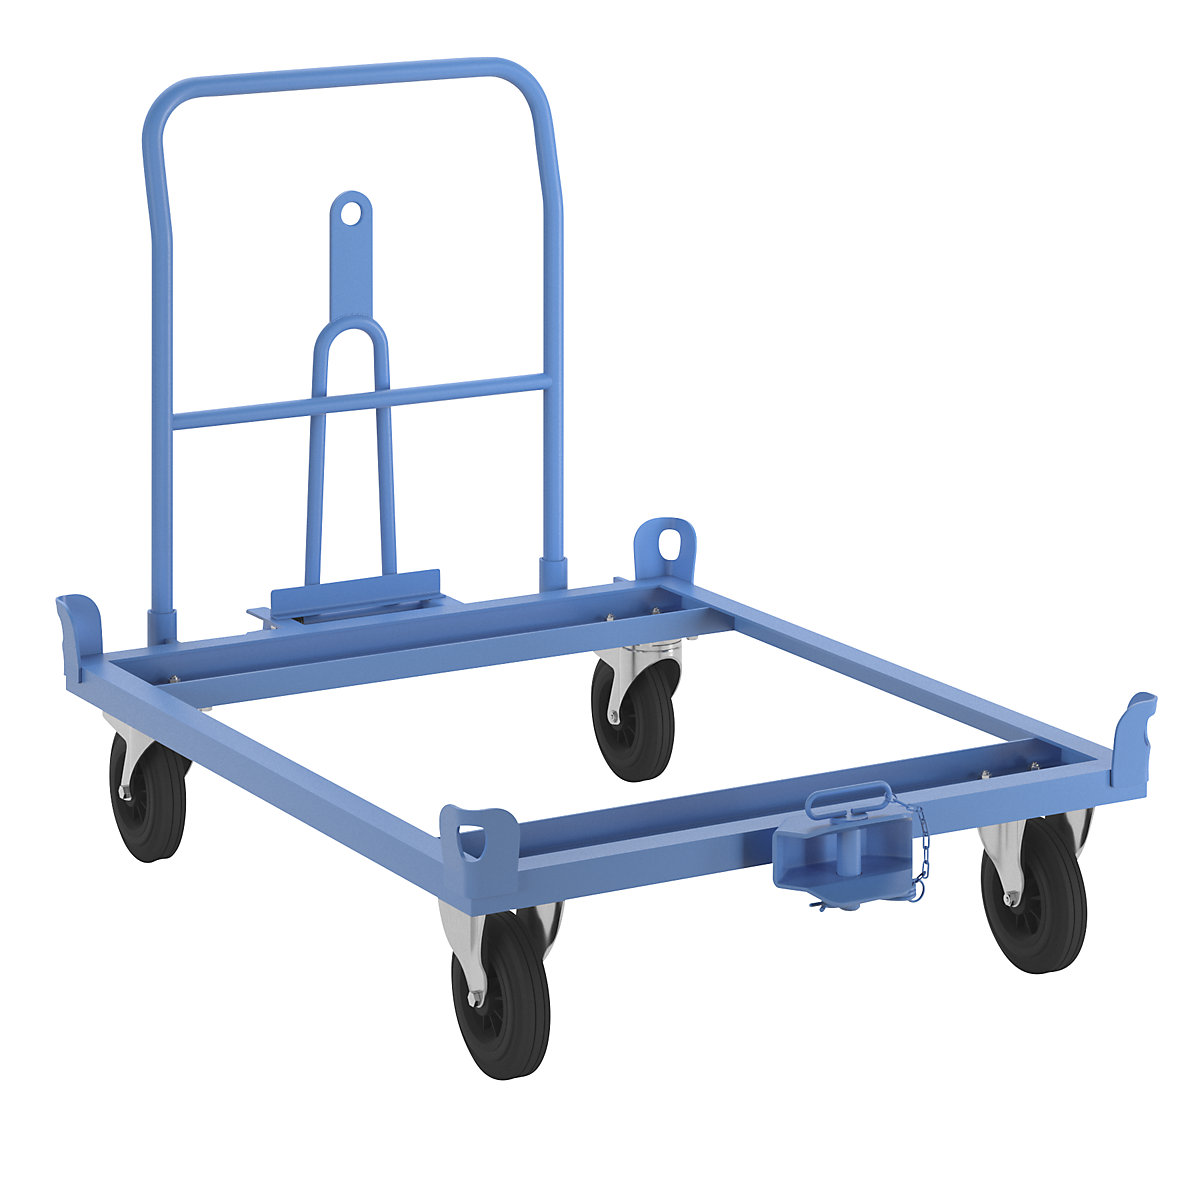 Dolly with drawbar and coupling – eurokraft pro, max. load 500 kg, platform width 1010 mm-11